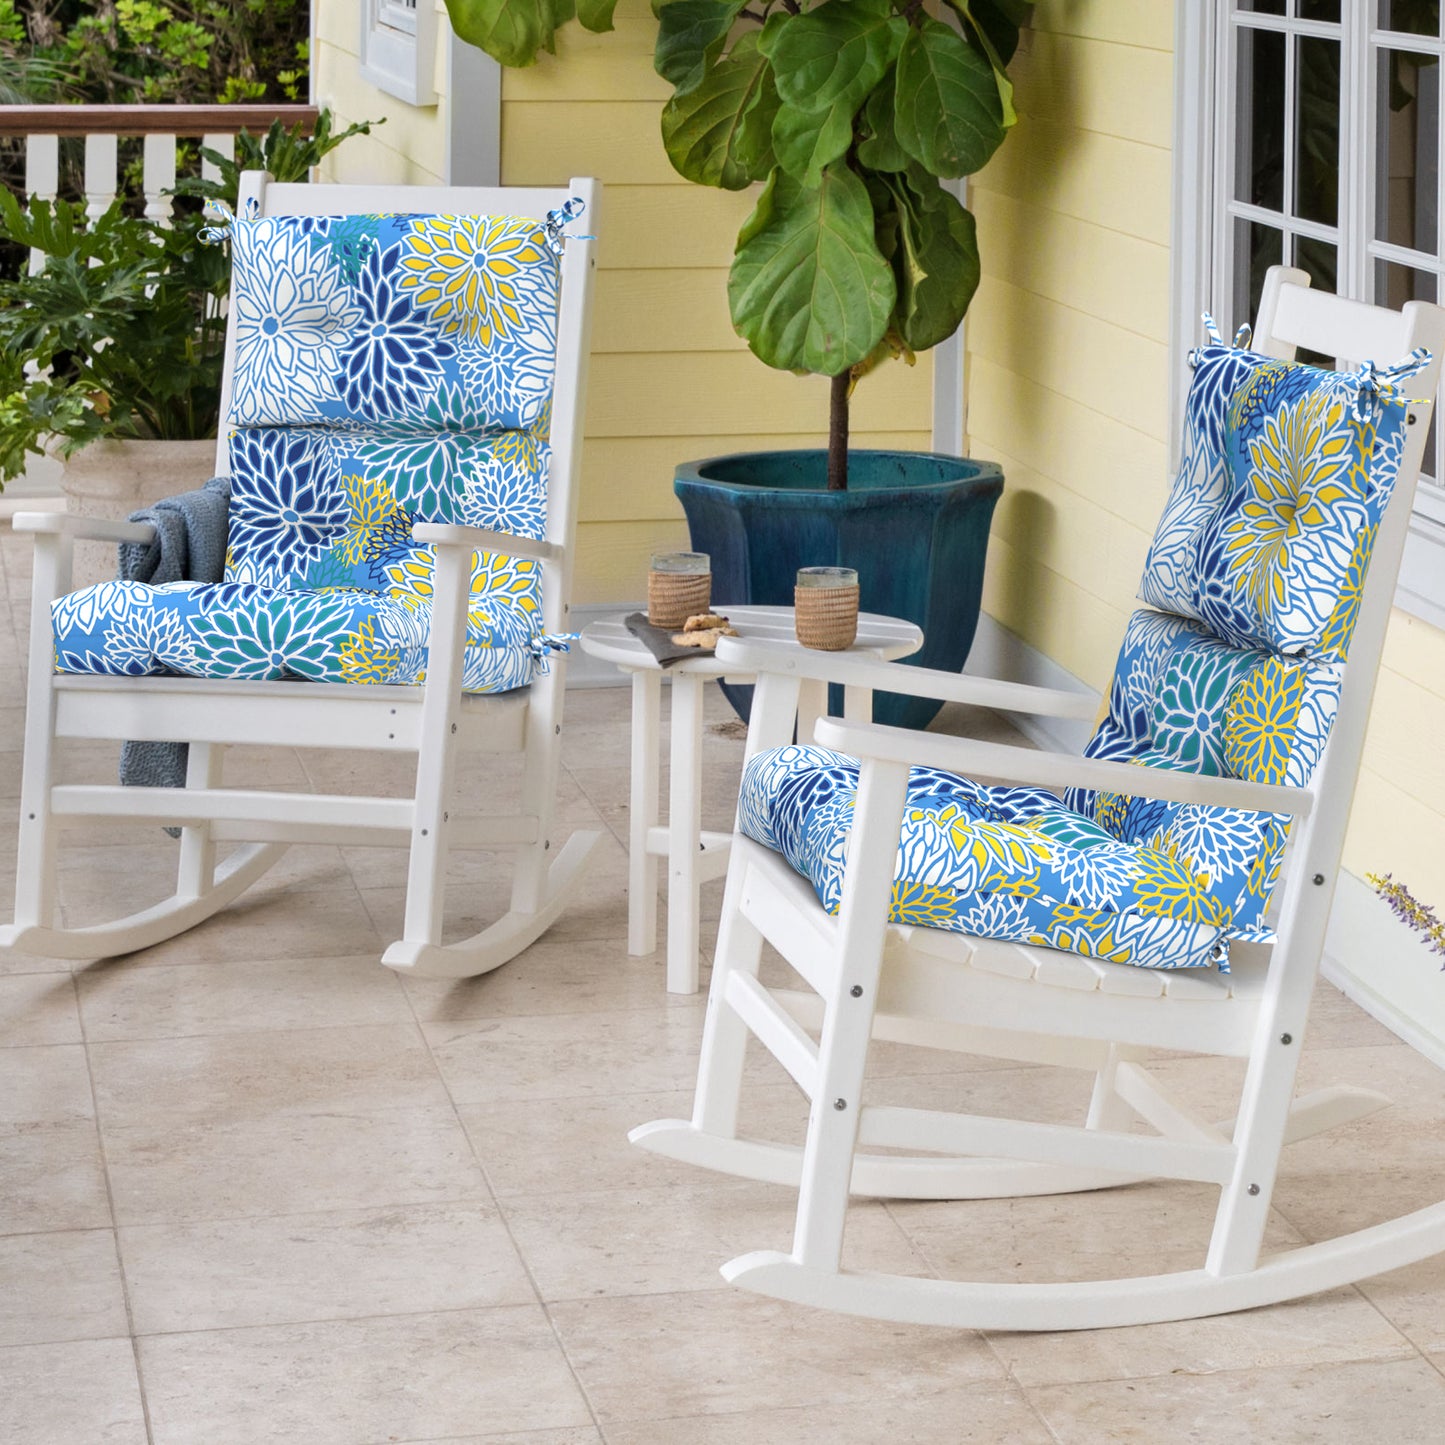 Melody Elephant Outdoor Tufted High Back Chair Cushions, Water Resistant Rocking Seat Chair Cushions 2 Pack, Adirondack Cushions for Patio Home Garden, 22" W x 20" D, Dahlia Blue